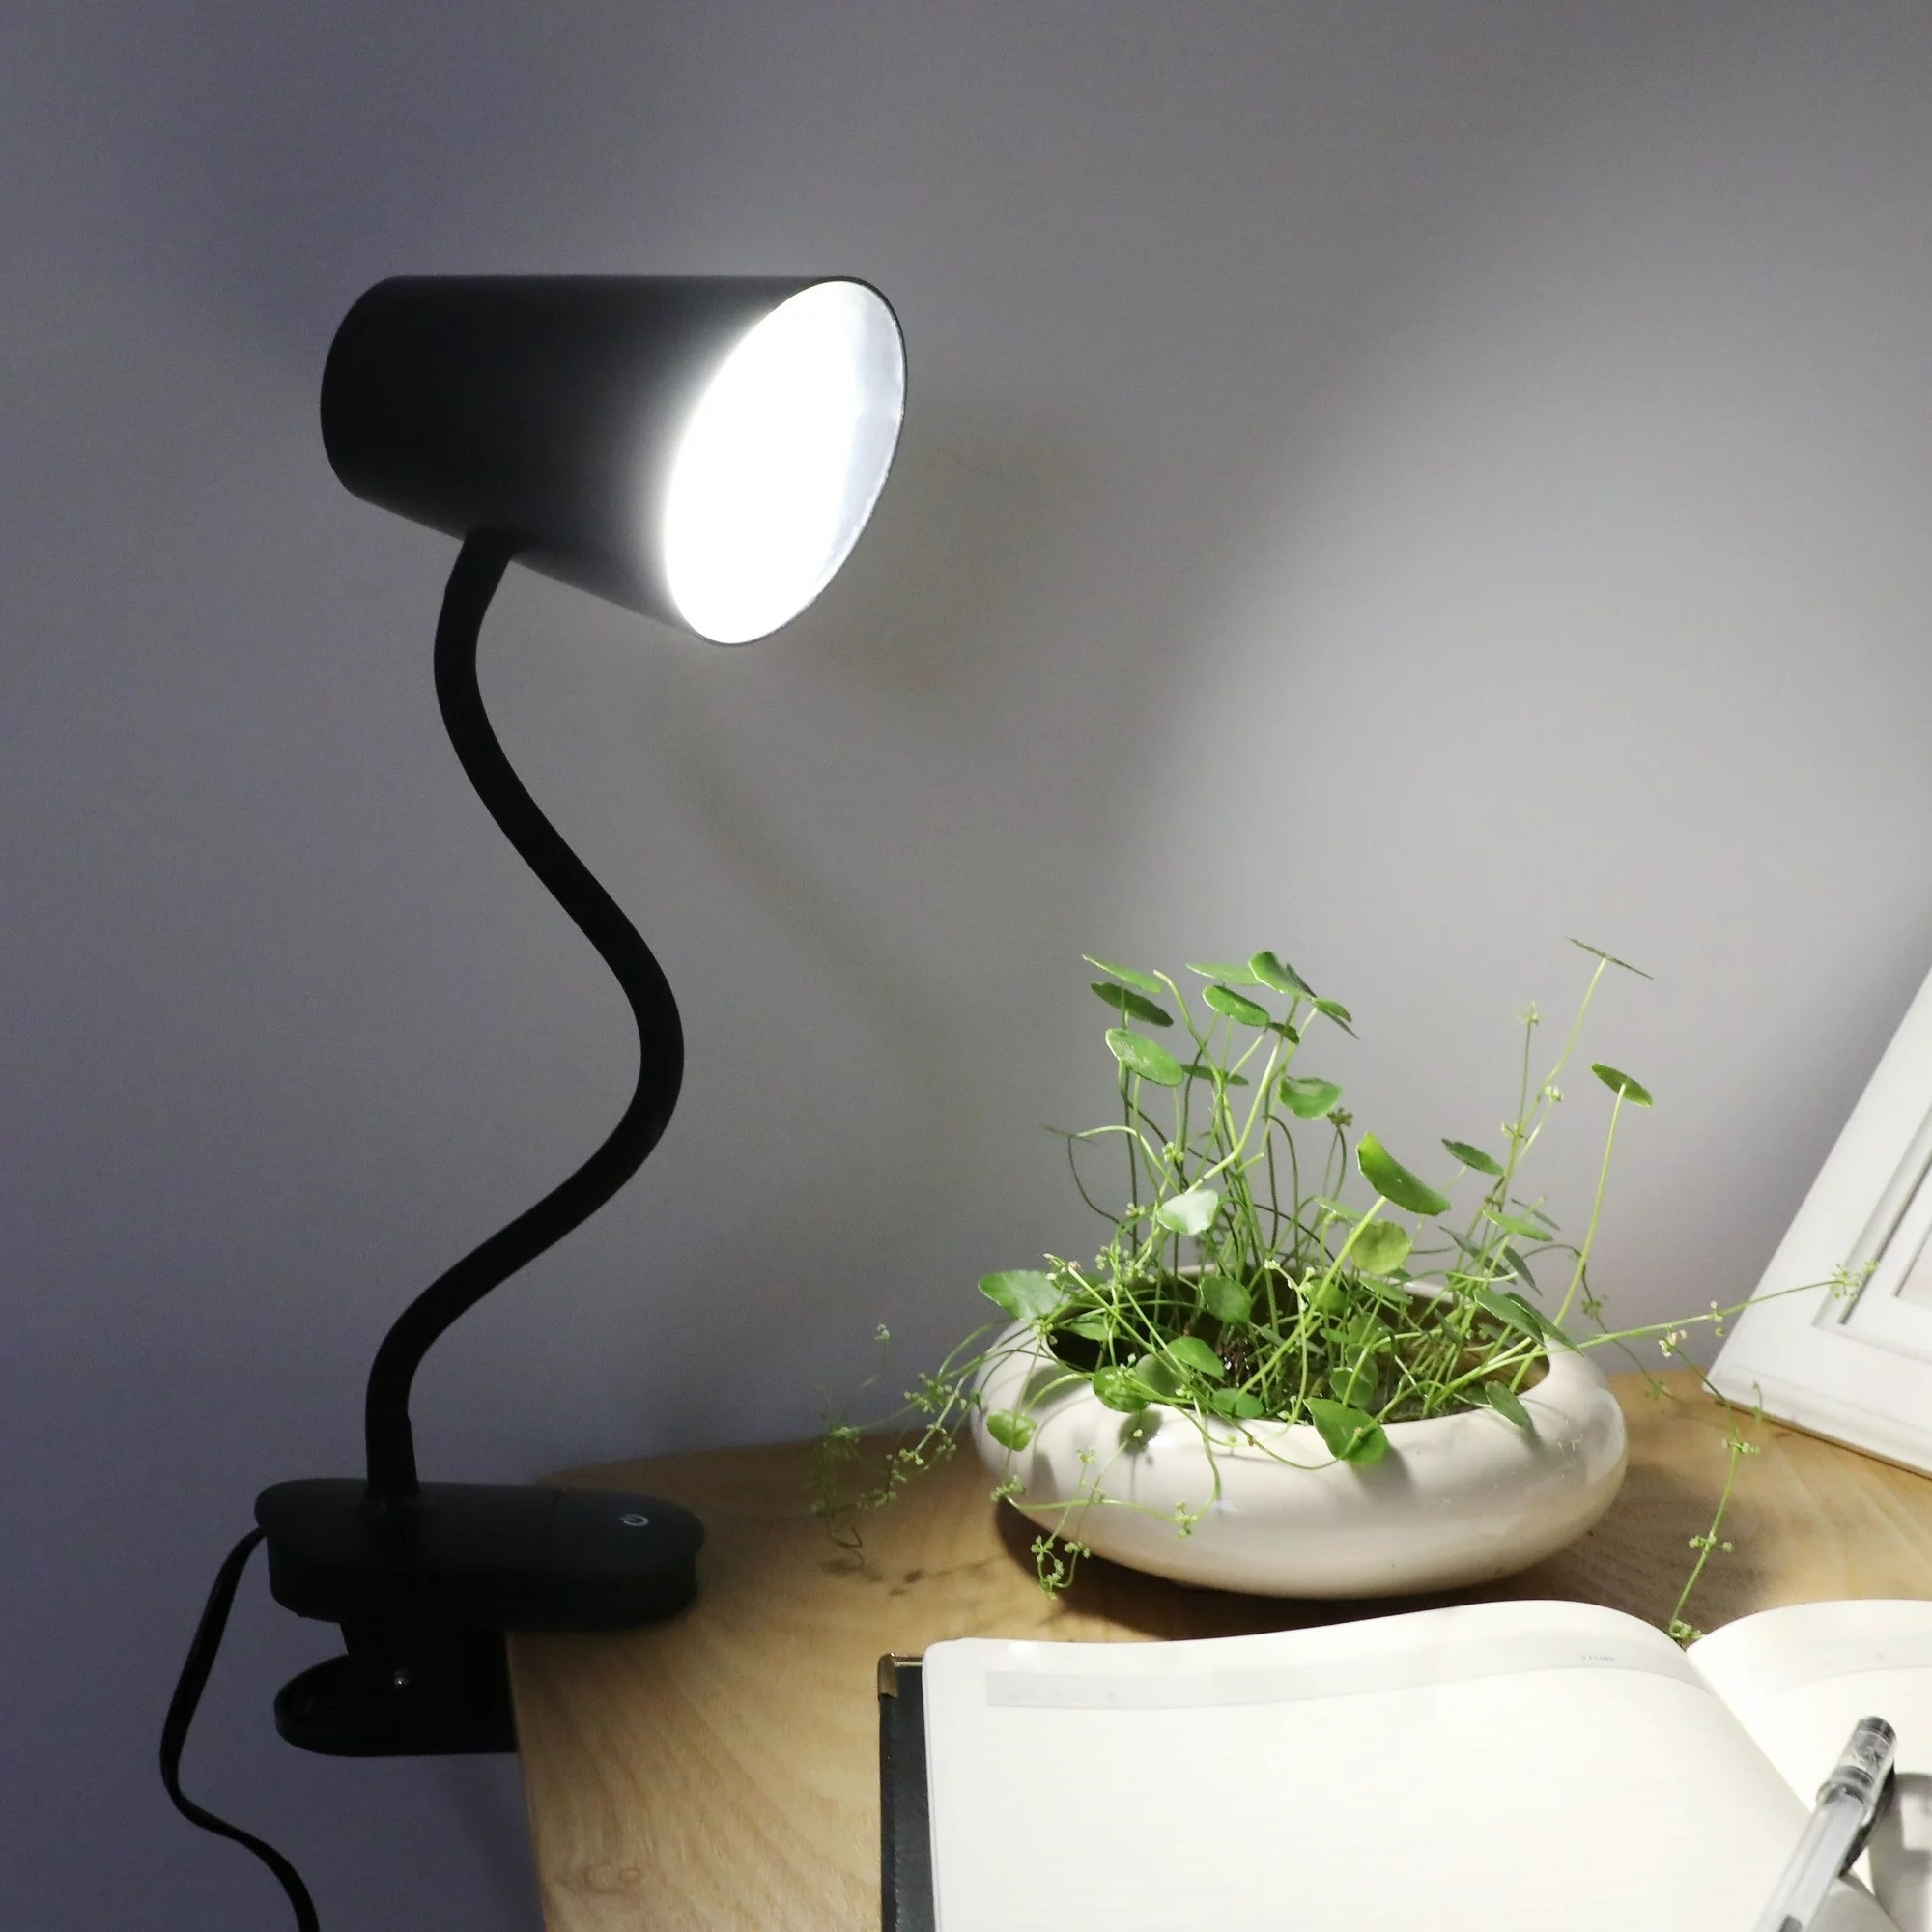 The lamp clipped to a night stand next to small potted plant, suggesting a cozy reading area